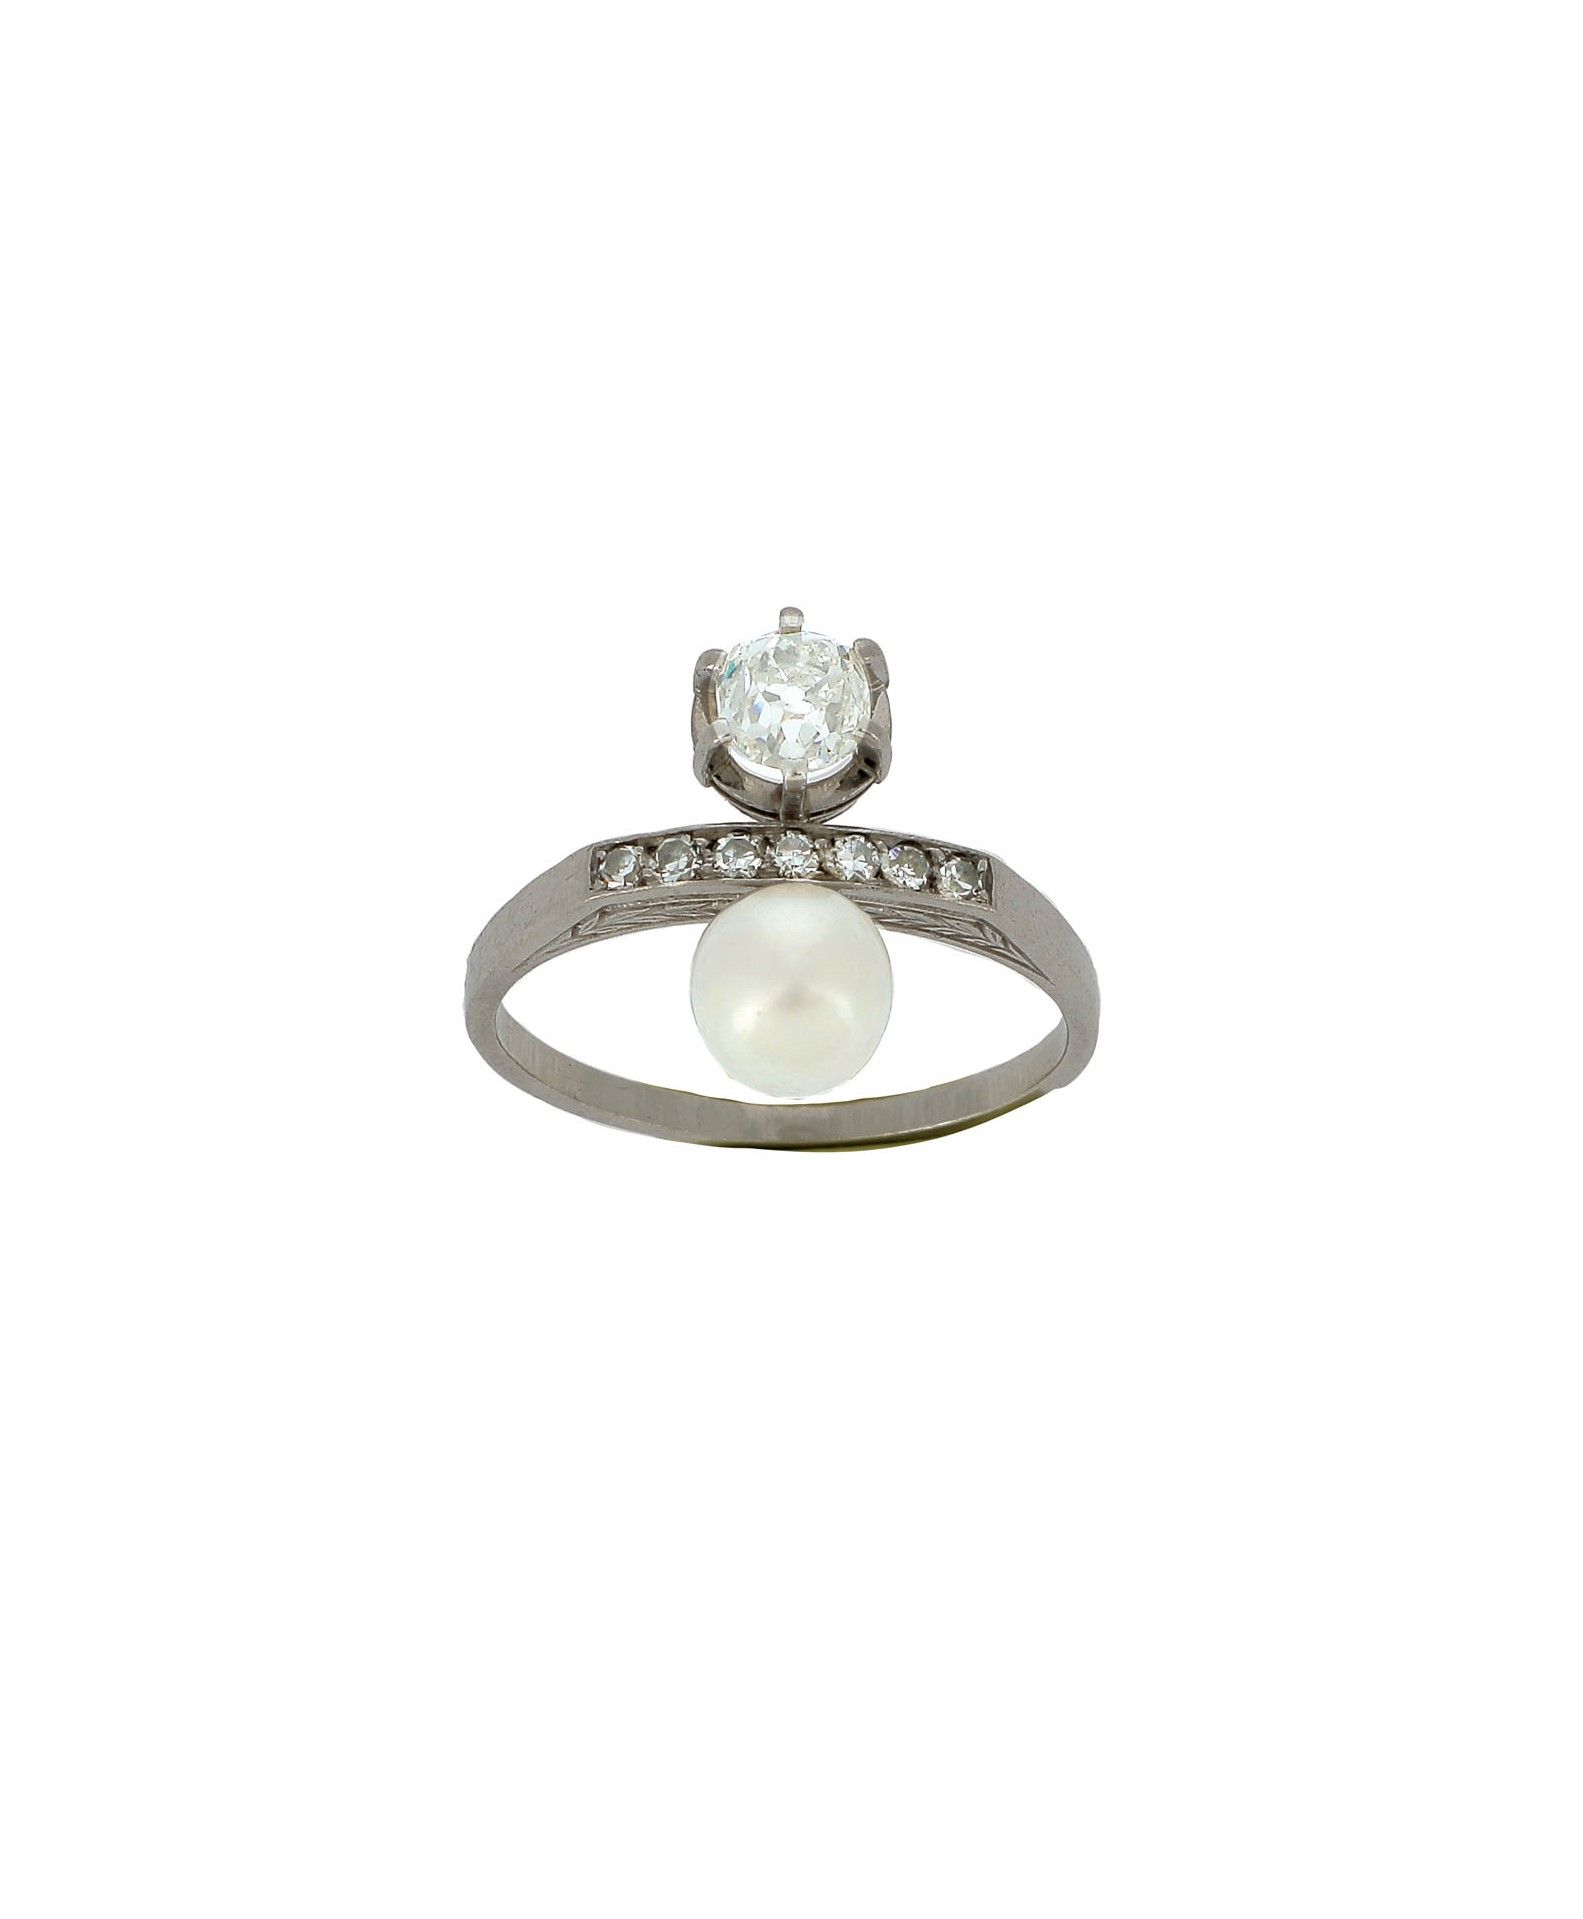 Null YOU ME RING

in platinum, set with a pearl (untested) and an old cut diamon&hellip;